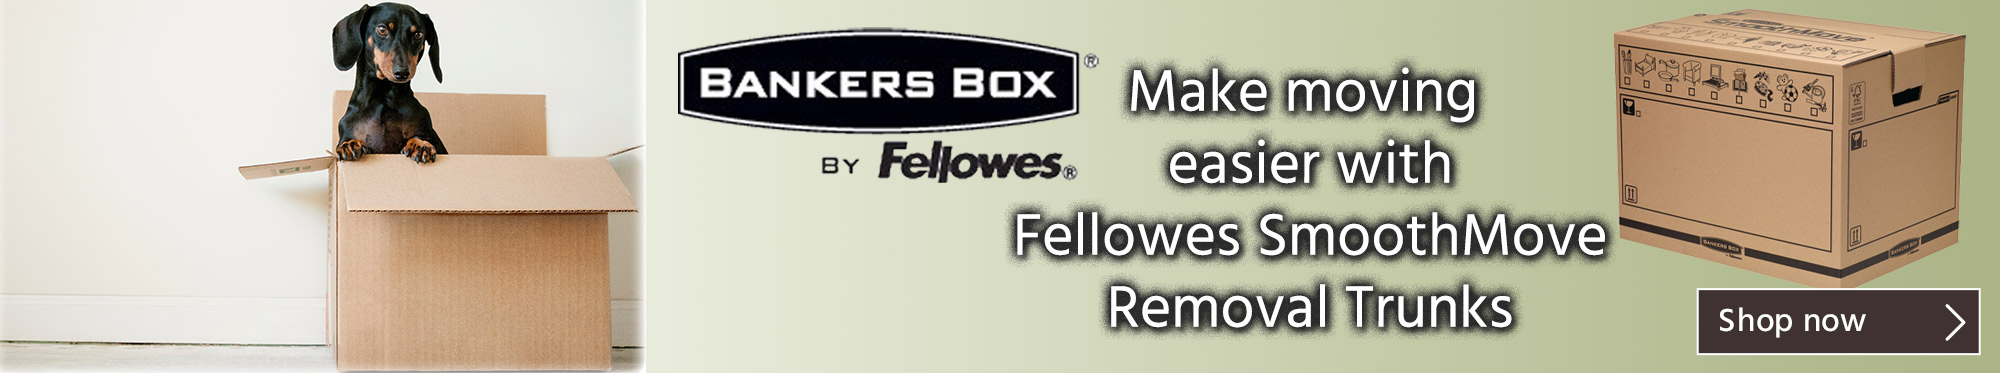 Fellowes SmoothMove Removal Trunks